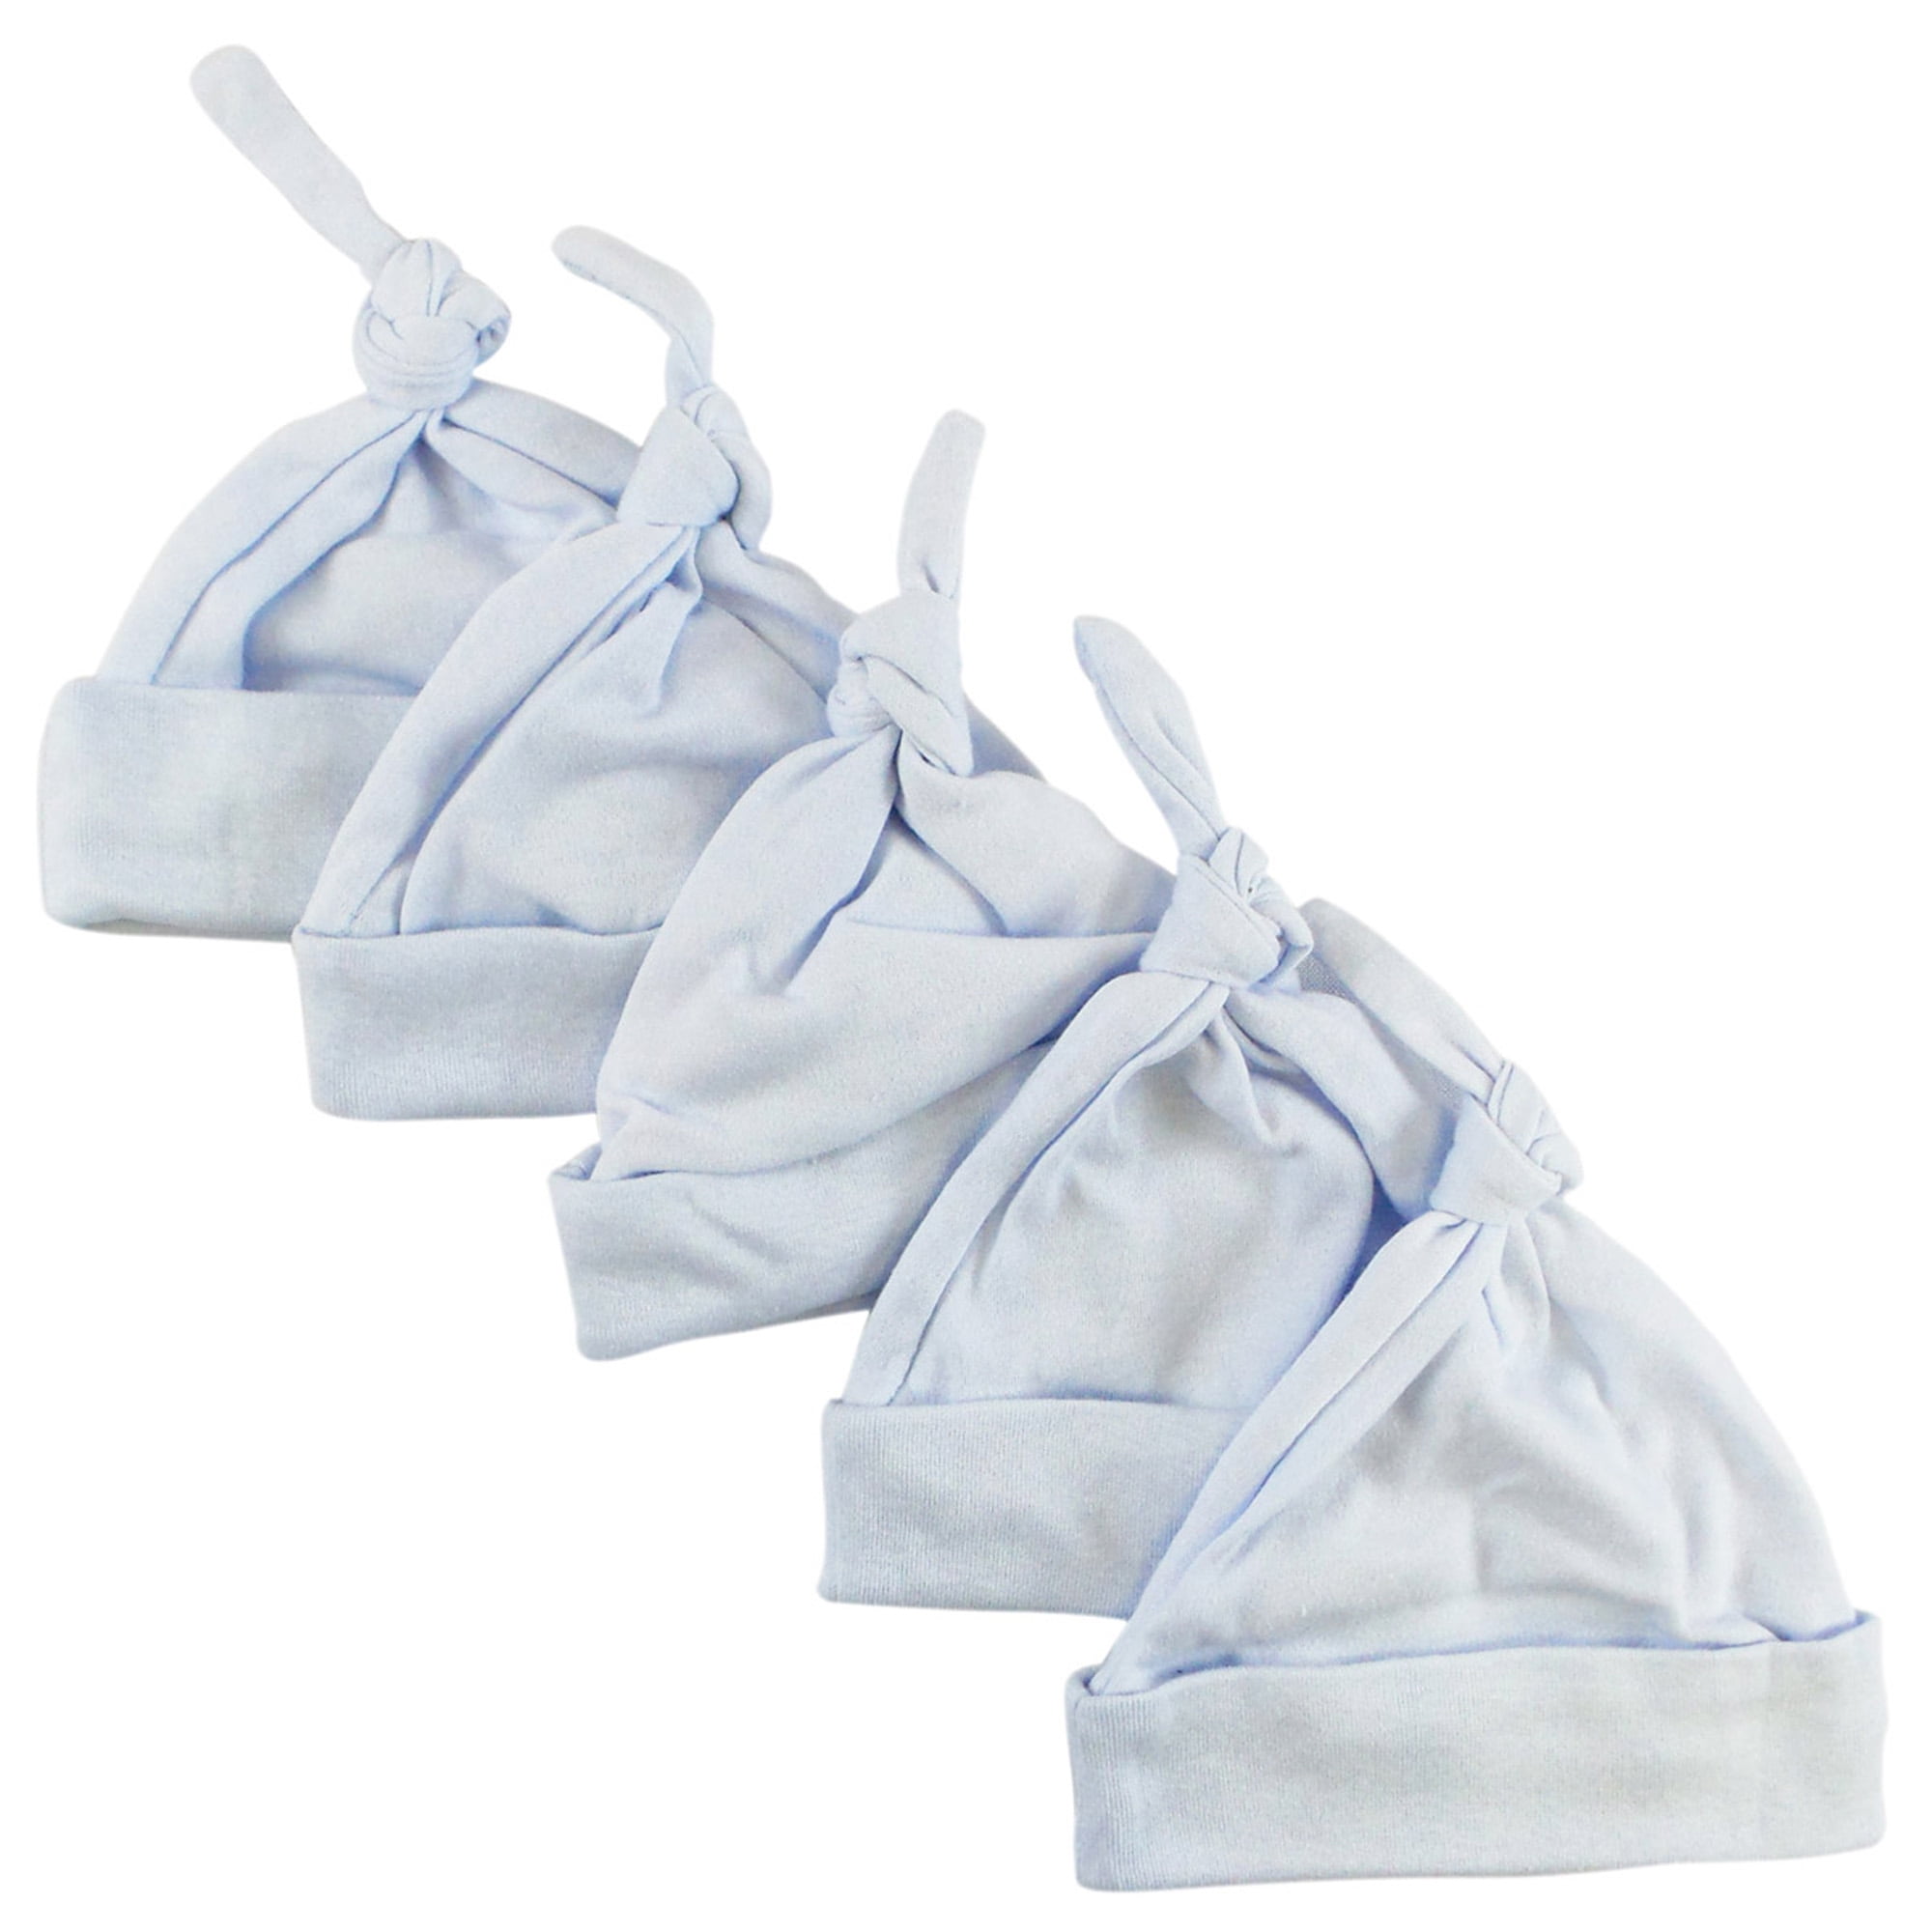 Knotted Baby Cap, Blue - Pack Of 5